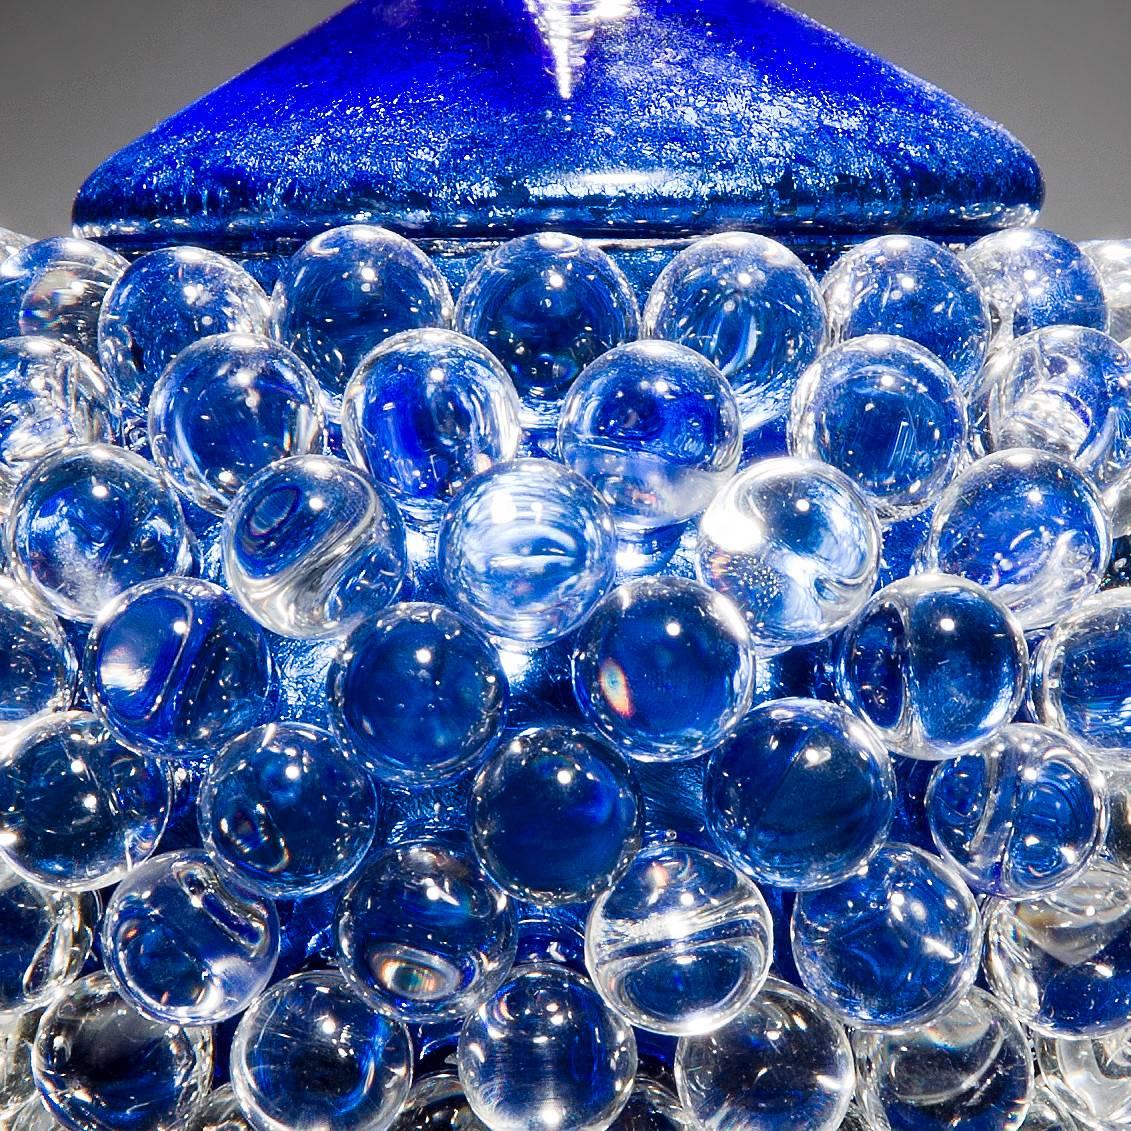 Art Glass Empoli Jar with Spike, a unique clear & blue glass vessel by James Lethbridge For Sale